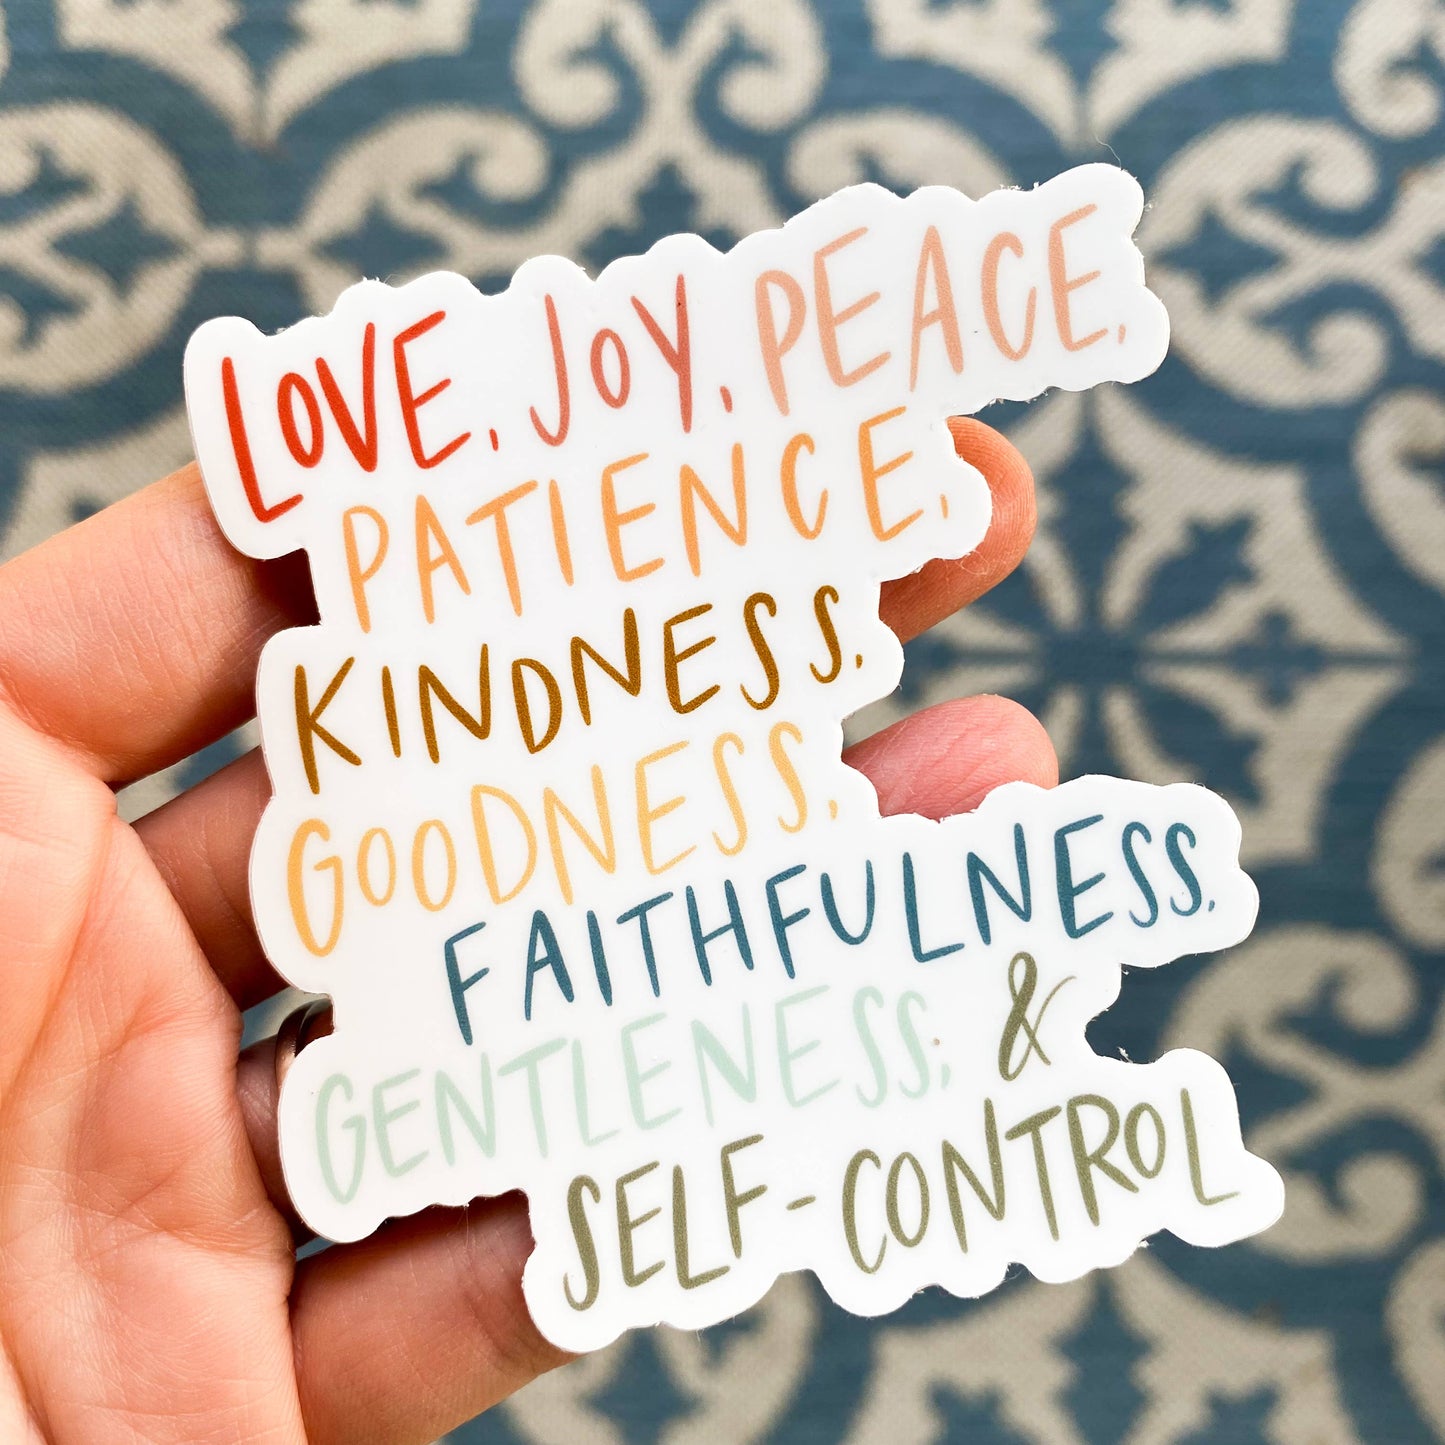 Fruit Of The Spirit Sticker *FREE SHIPPING with any order over $10